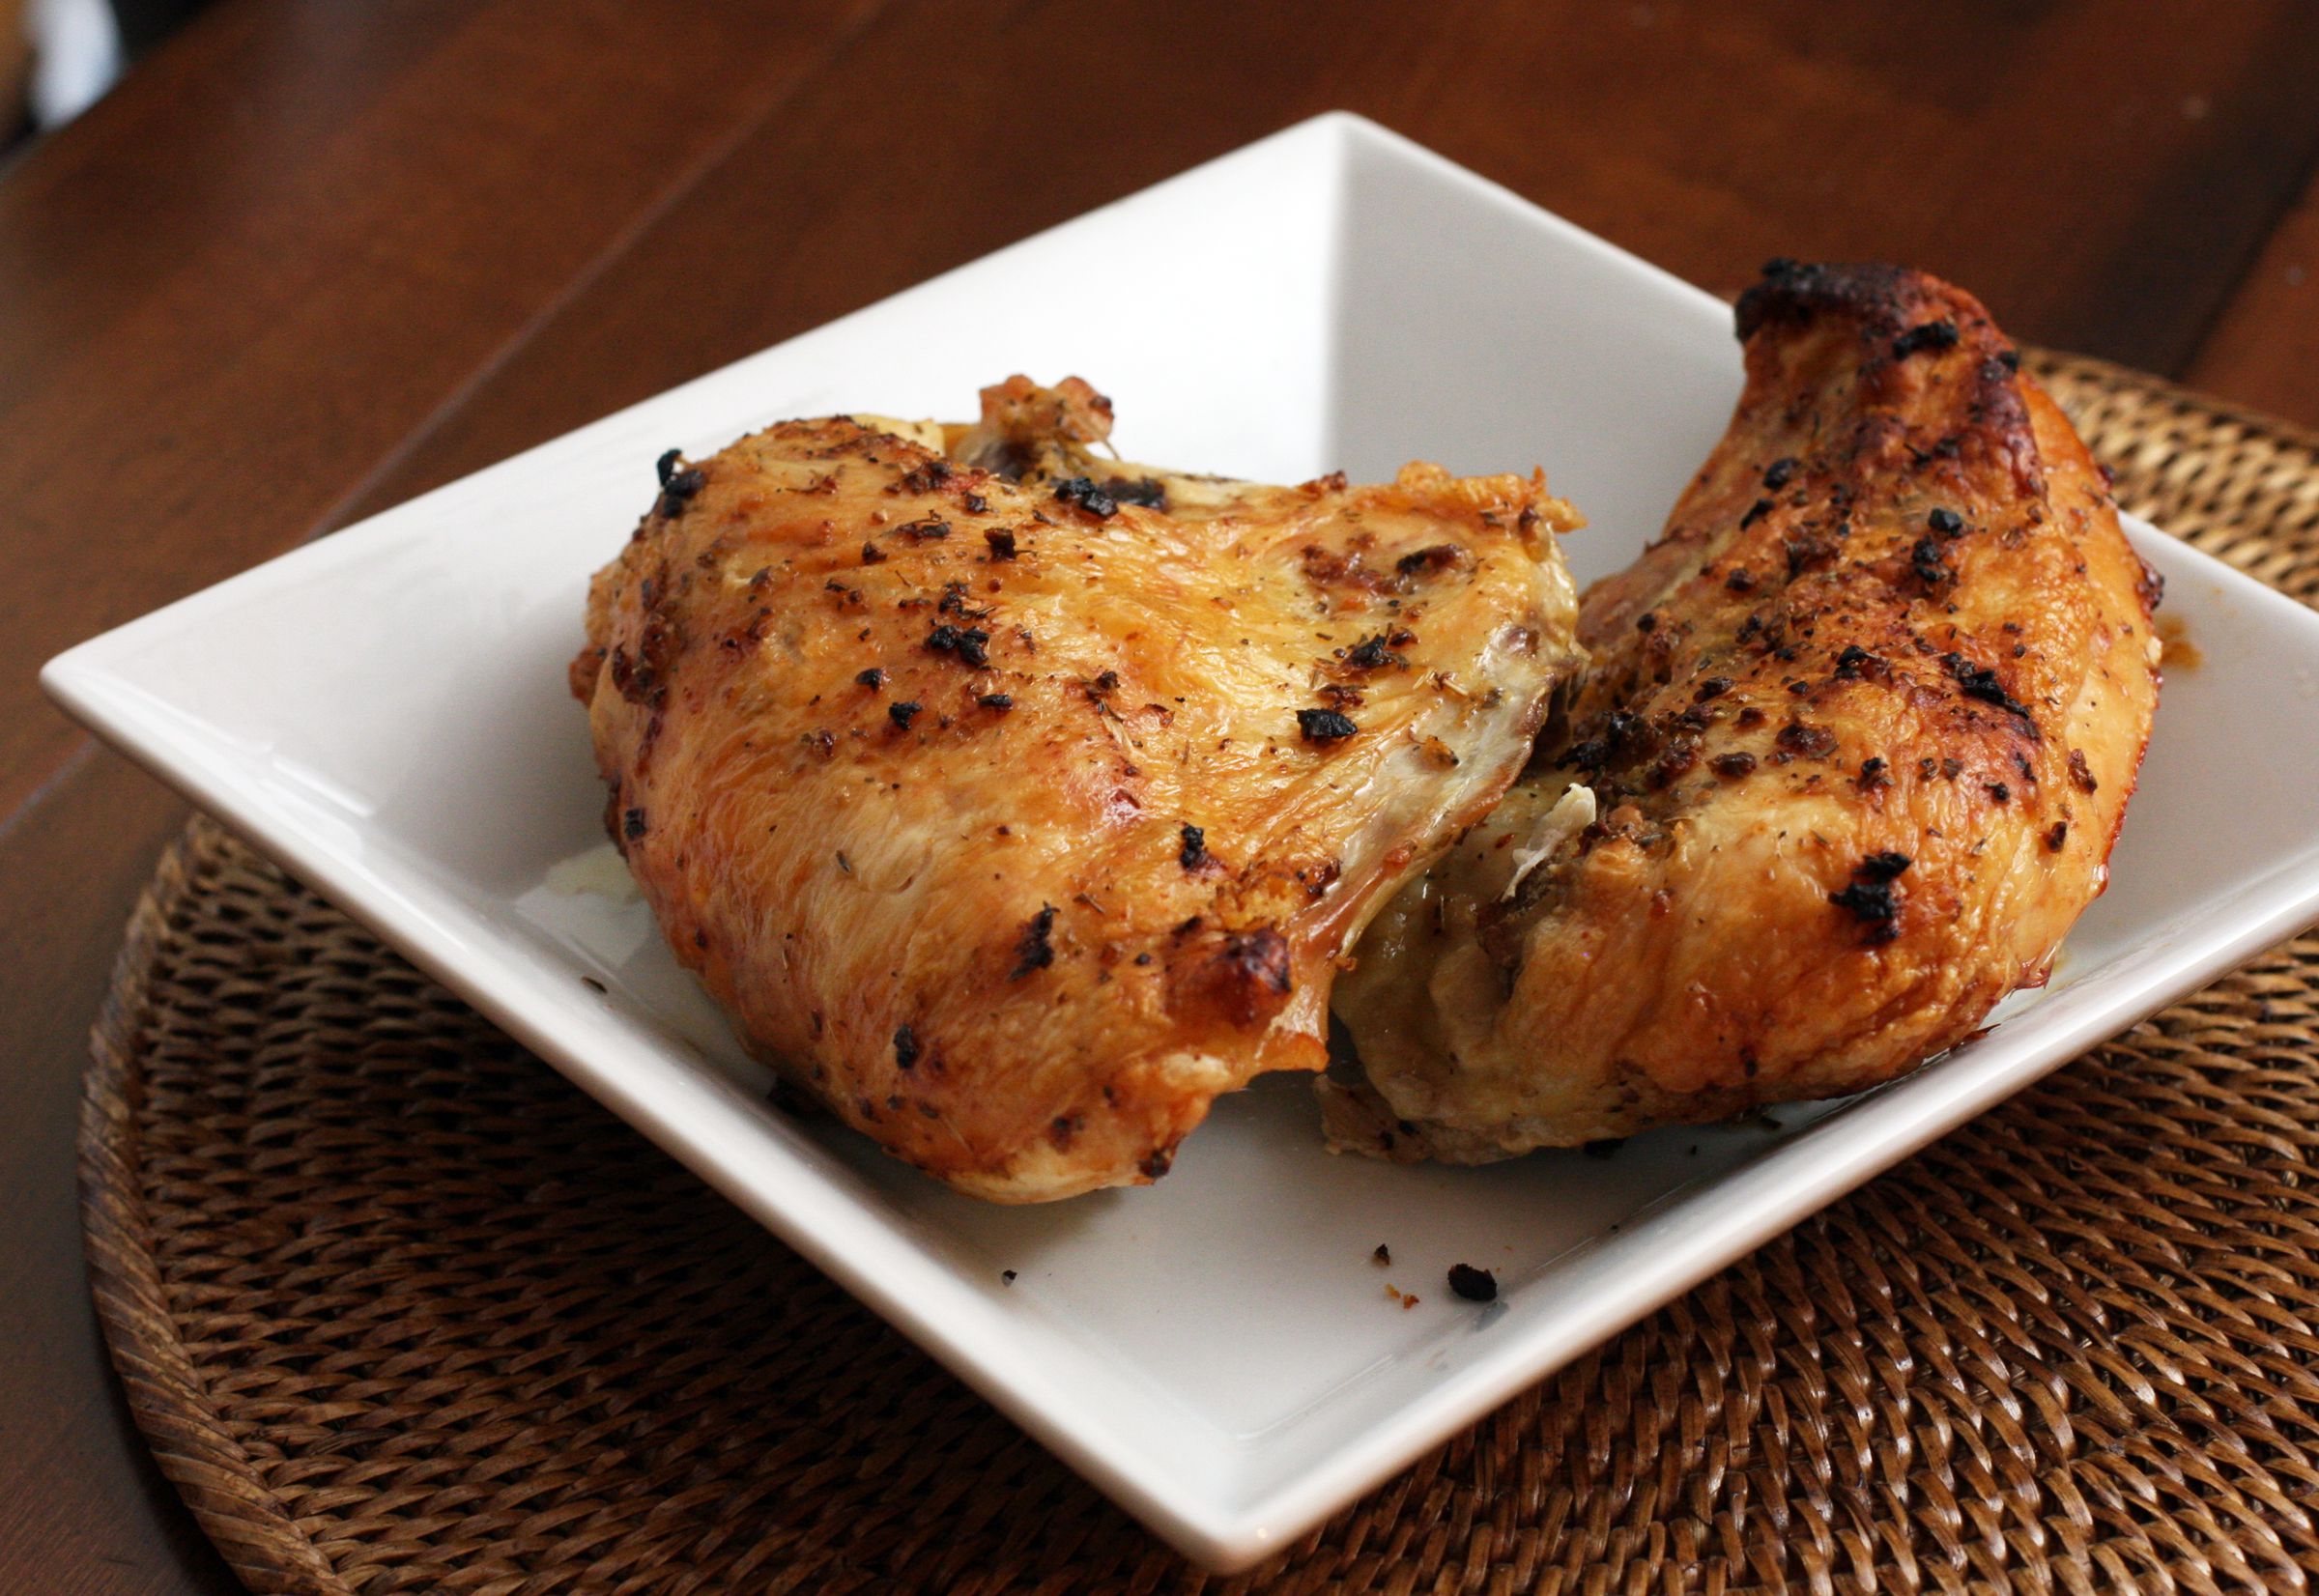 Baked Split Chicken Breasts With Garlic and Oregano